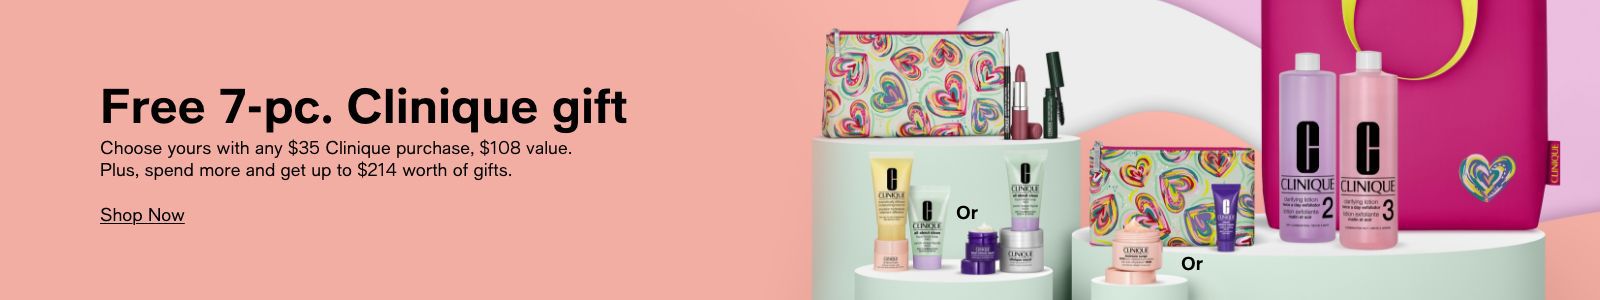 Free 7-piece, Clinique gift, Choose yours with any $35 Clinique purchase, $108 value, Plus, spend more and get up to $214 worth of gifts